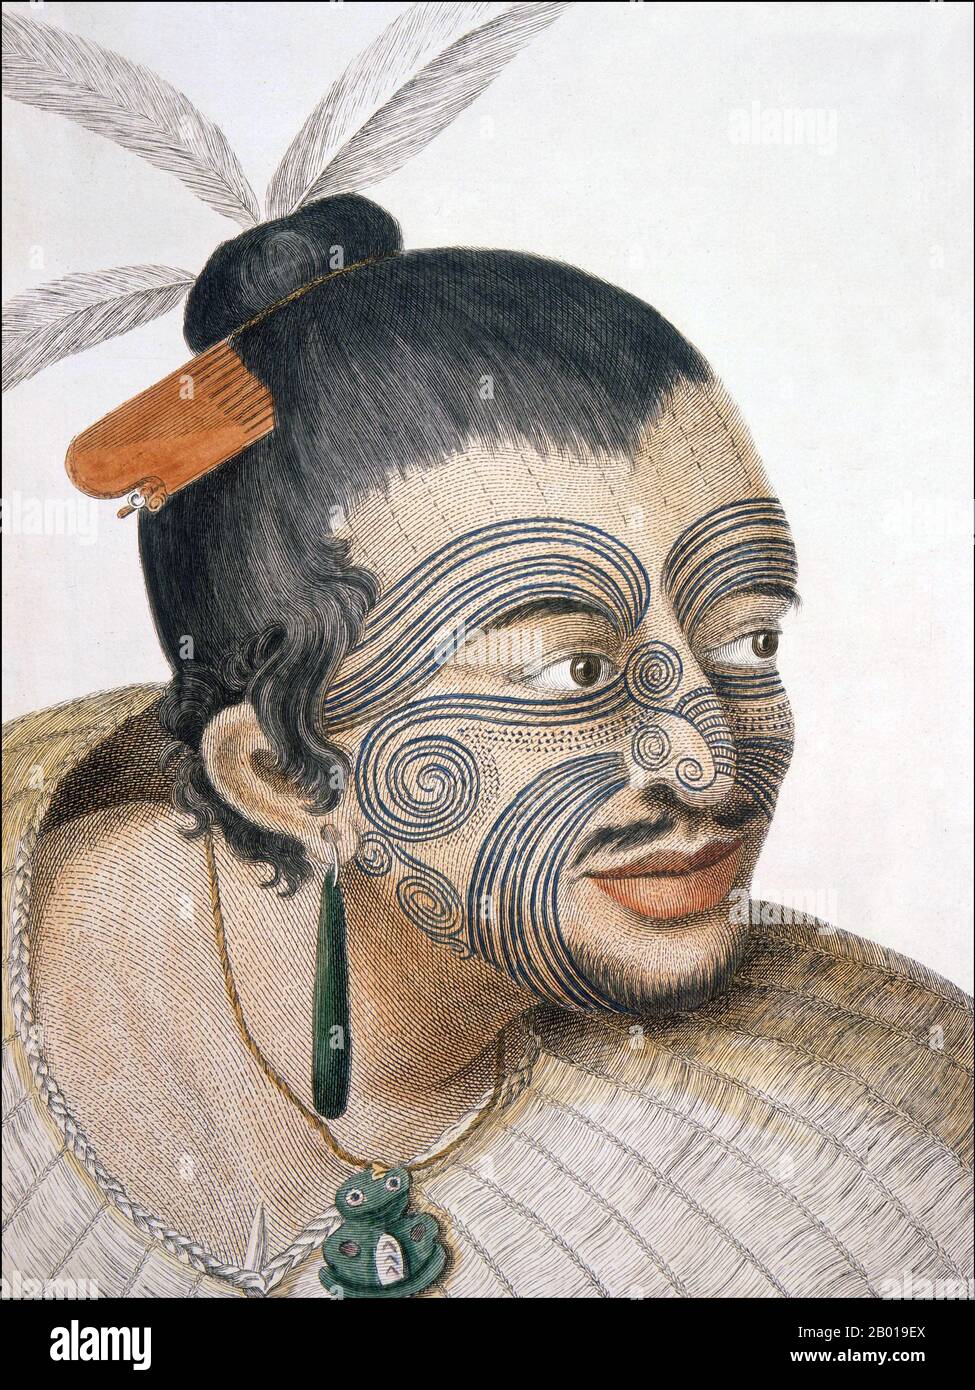 New Zealand: A Maori chief with facial moko tattoo. Engraving by Thomas Chambers after Sydney Parkinson (1745 - 26 January 1771), 1769.  A head and shoulders portrait of a Māori man, his hair in a topknot with feathers and a bone comb, full facial moko, a greenstone earring, a tiki and a flax cloak. He has a small beard and a moustache. Sydney Parkinson was the artist on Captain Cook's first voyage to New Zealand in 1769.  Tā moko is the permanent body and face marking by Māori, the indigenous people of New Zealand. Stock Photo